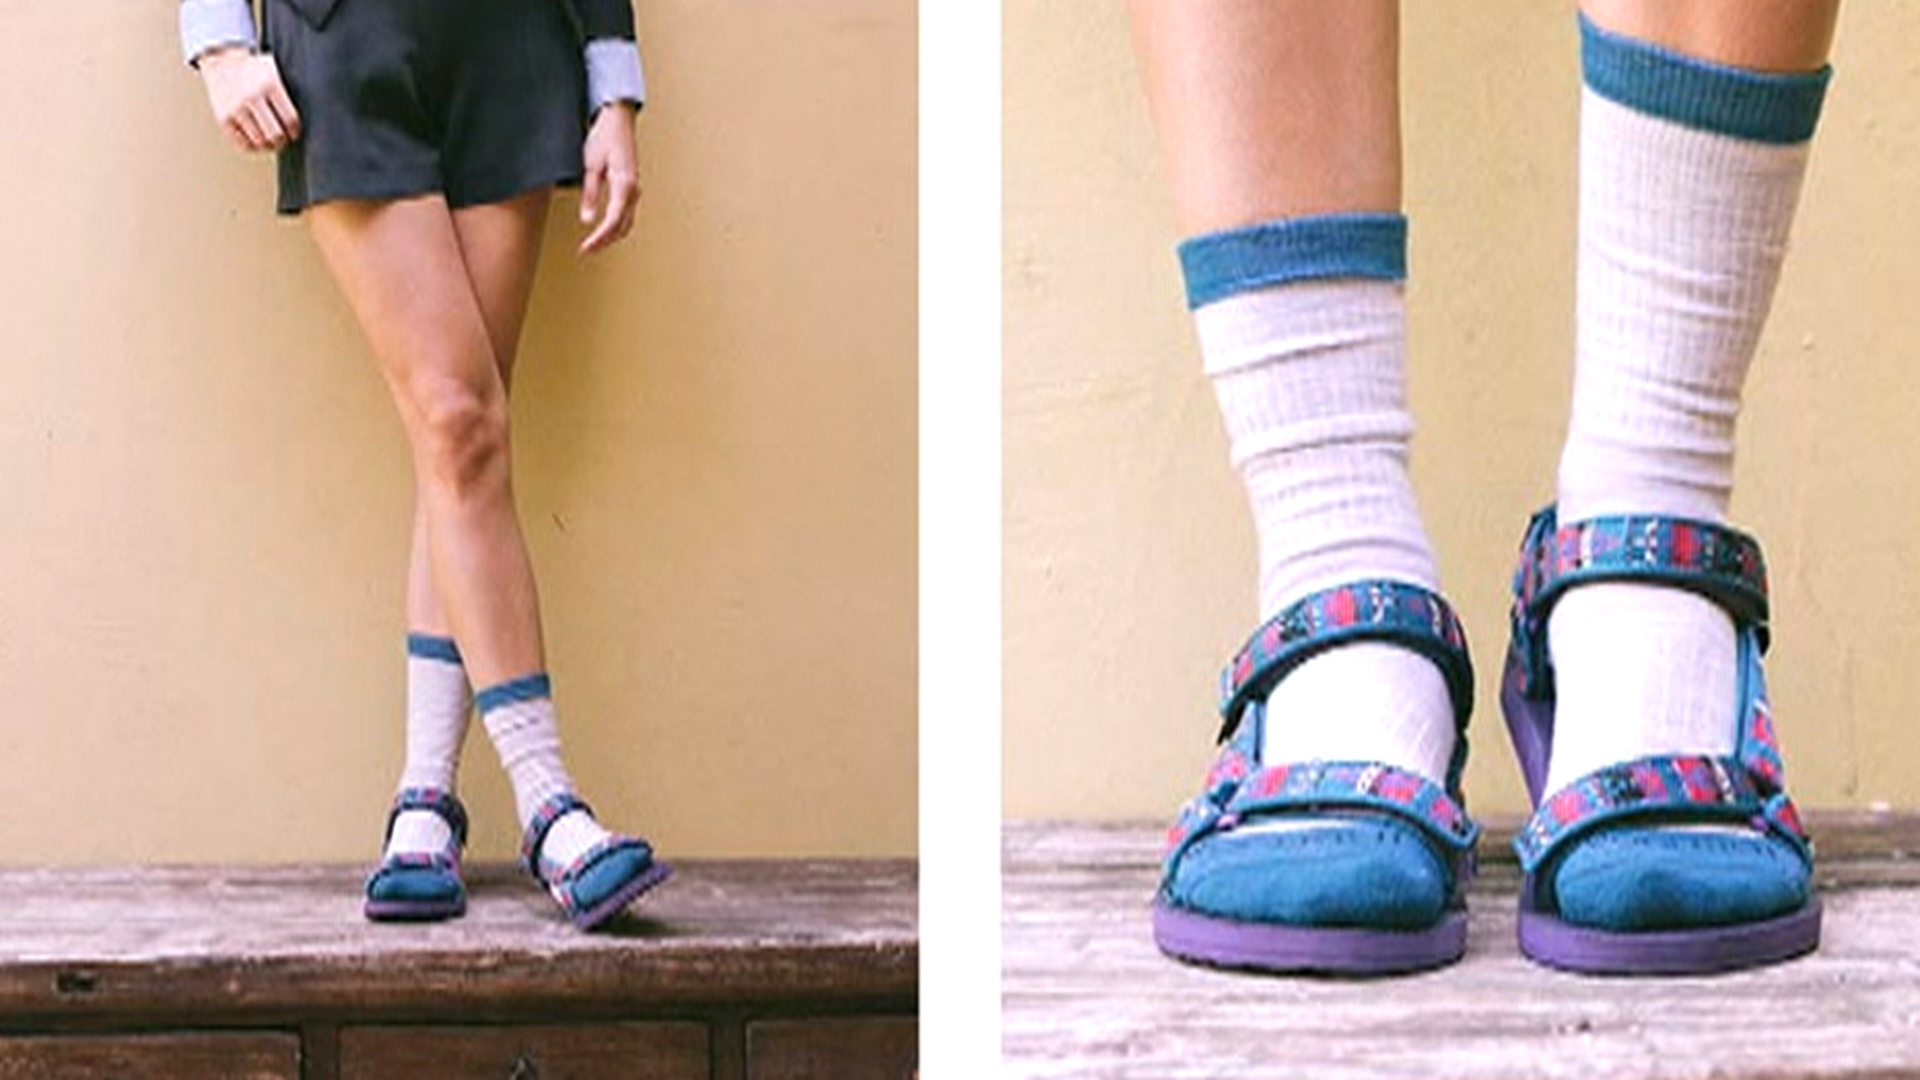 Socks and sandals are a new trend as Dad's driveway fashion the runway